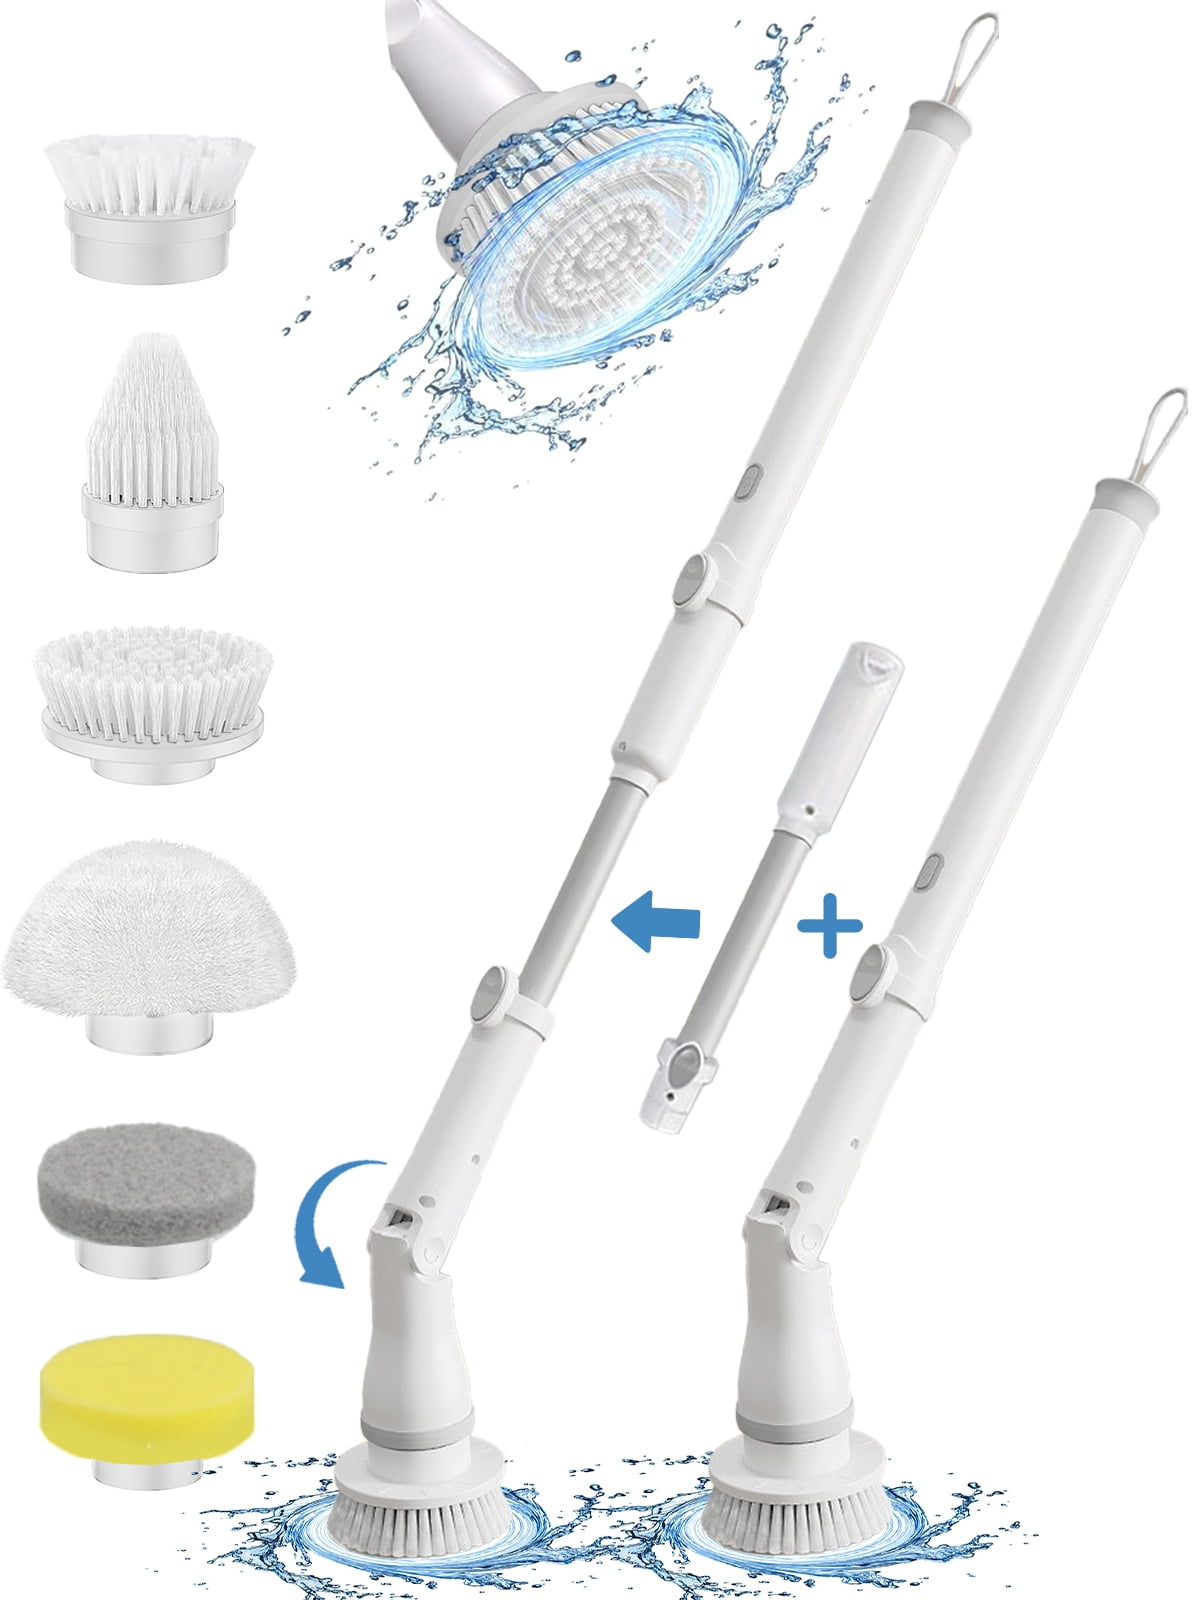 Kitchen And Bathroom Groove Cleaning Brush Air Conditioning Outlet Wind  Shutter/Scrub Brushes for Cleaning dish brush 